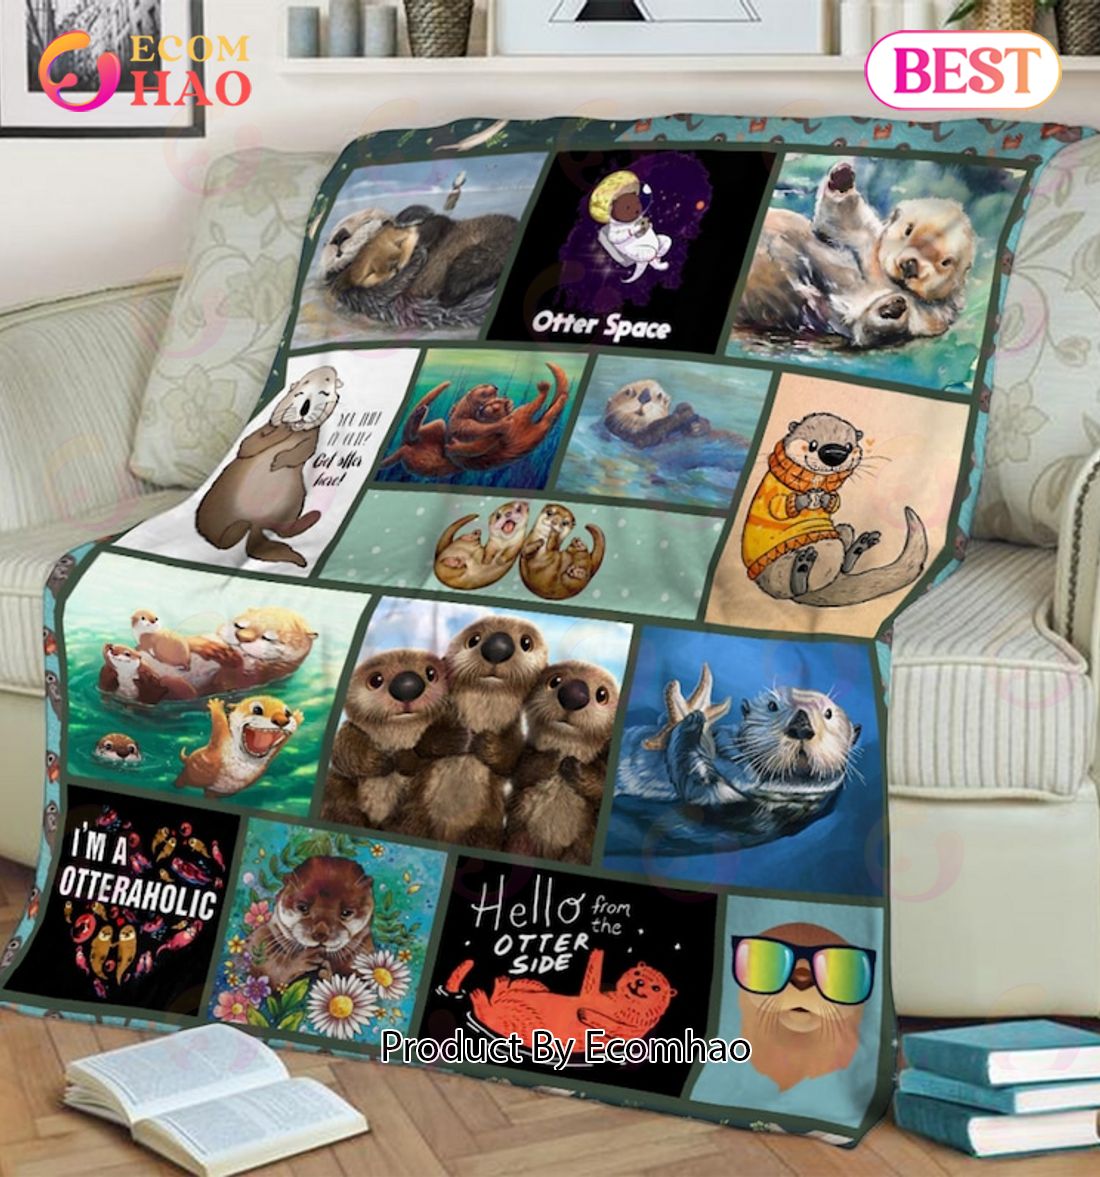 Otter Space Blanket I'm A Otteraholic Quilt, Fleece Blanket, Sherpa Fleece Blanket